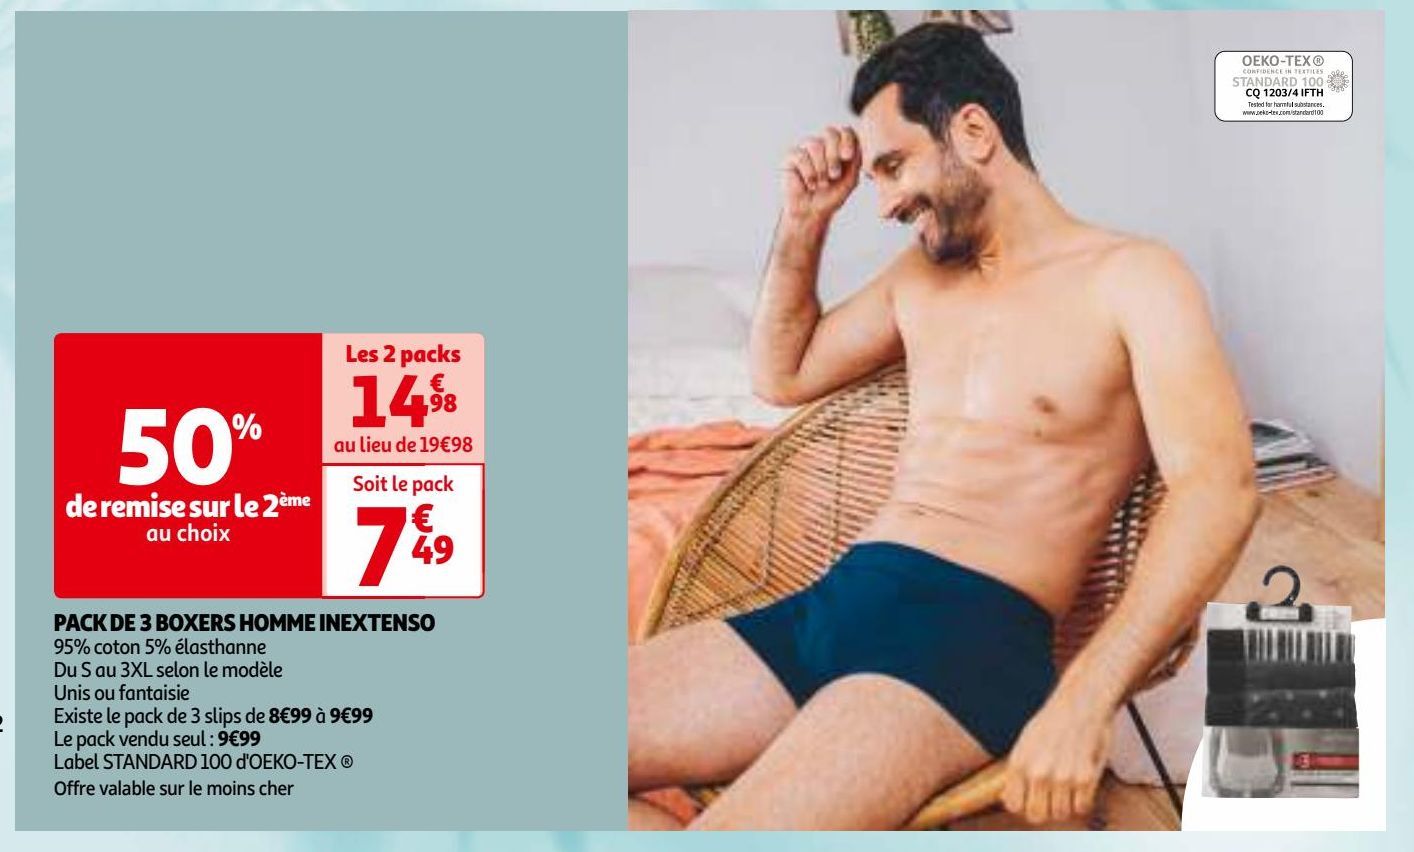  PACK DE 3 BOXERS HOMME INEXTENSO